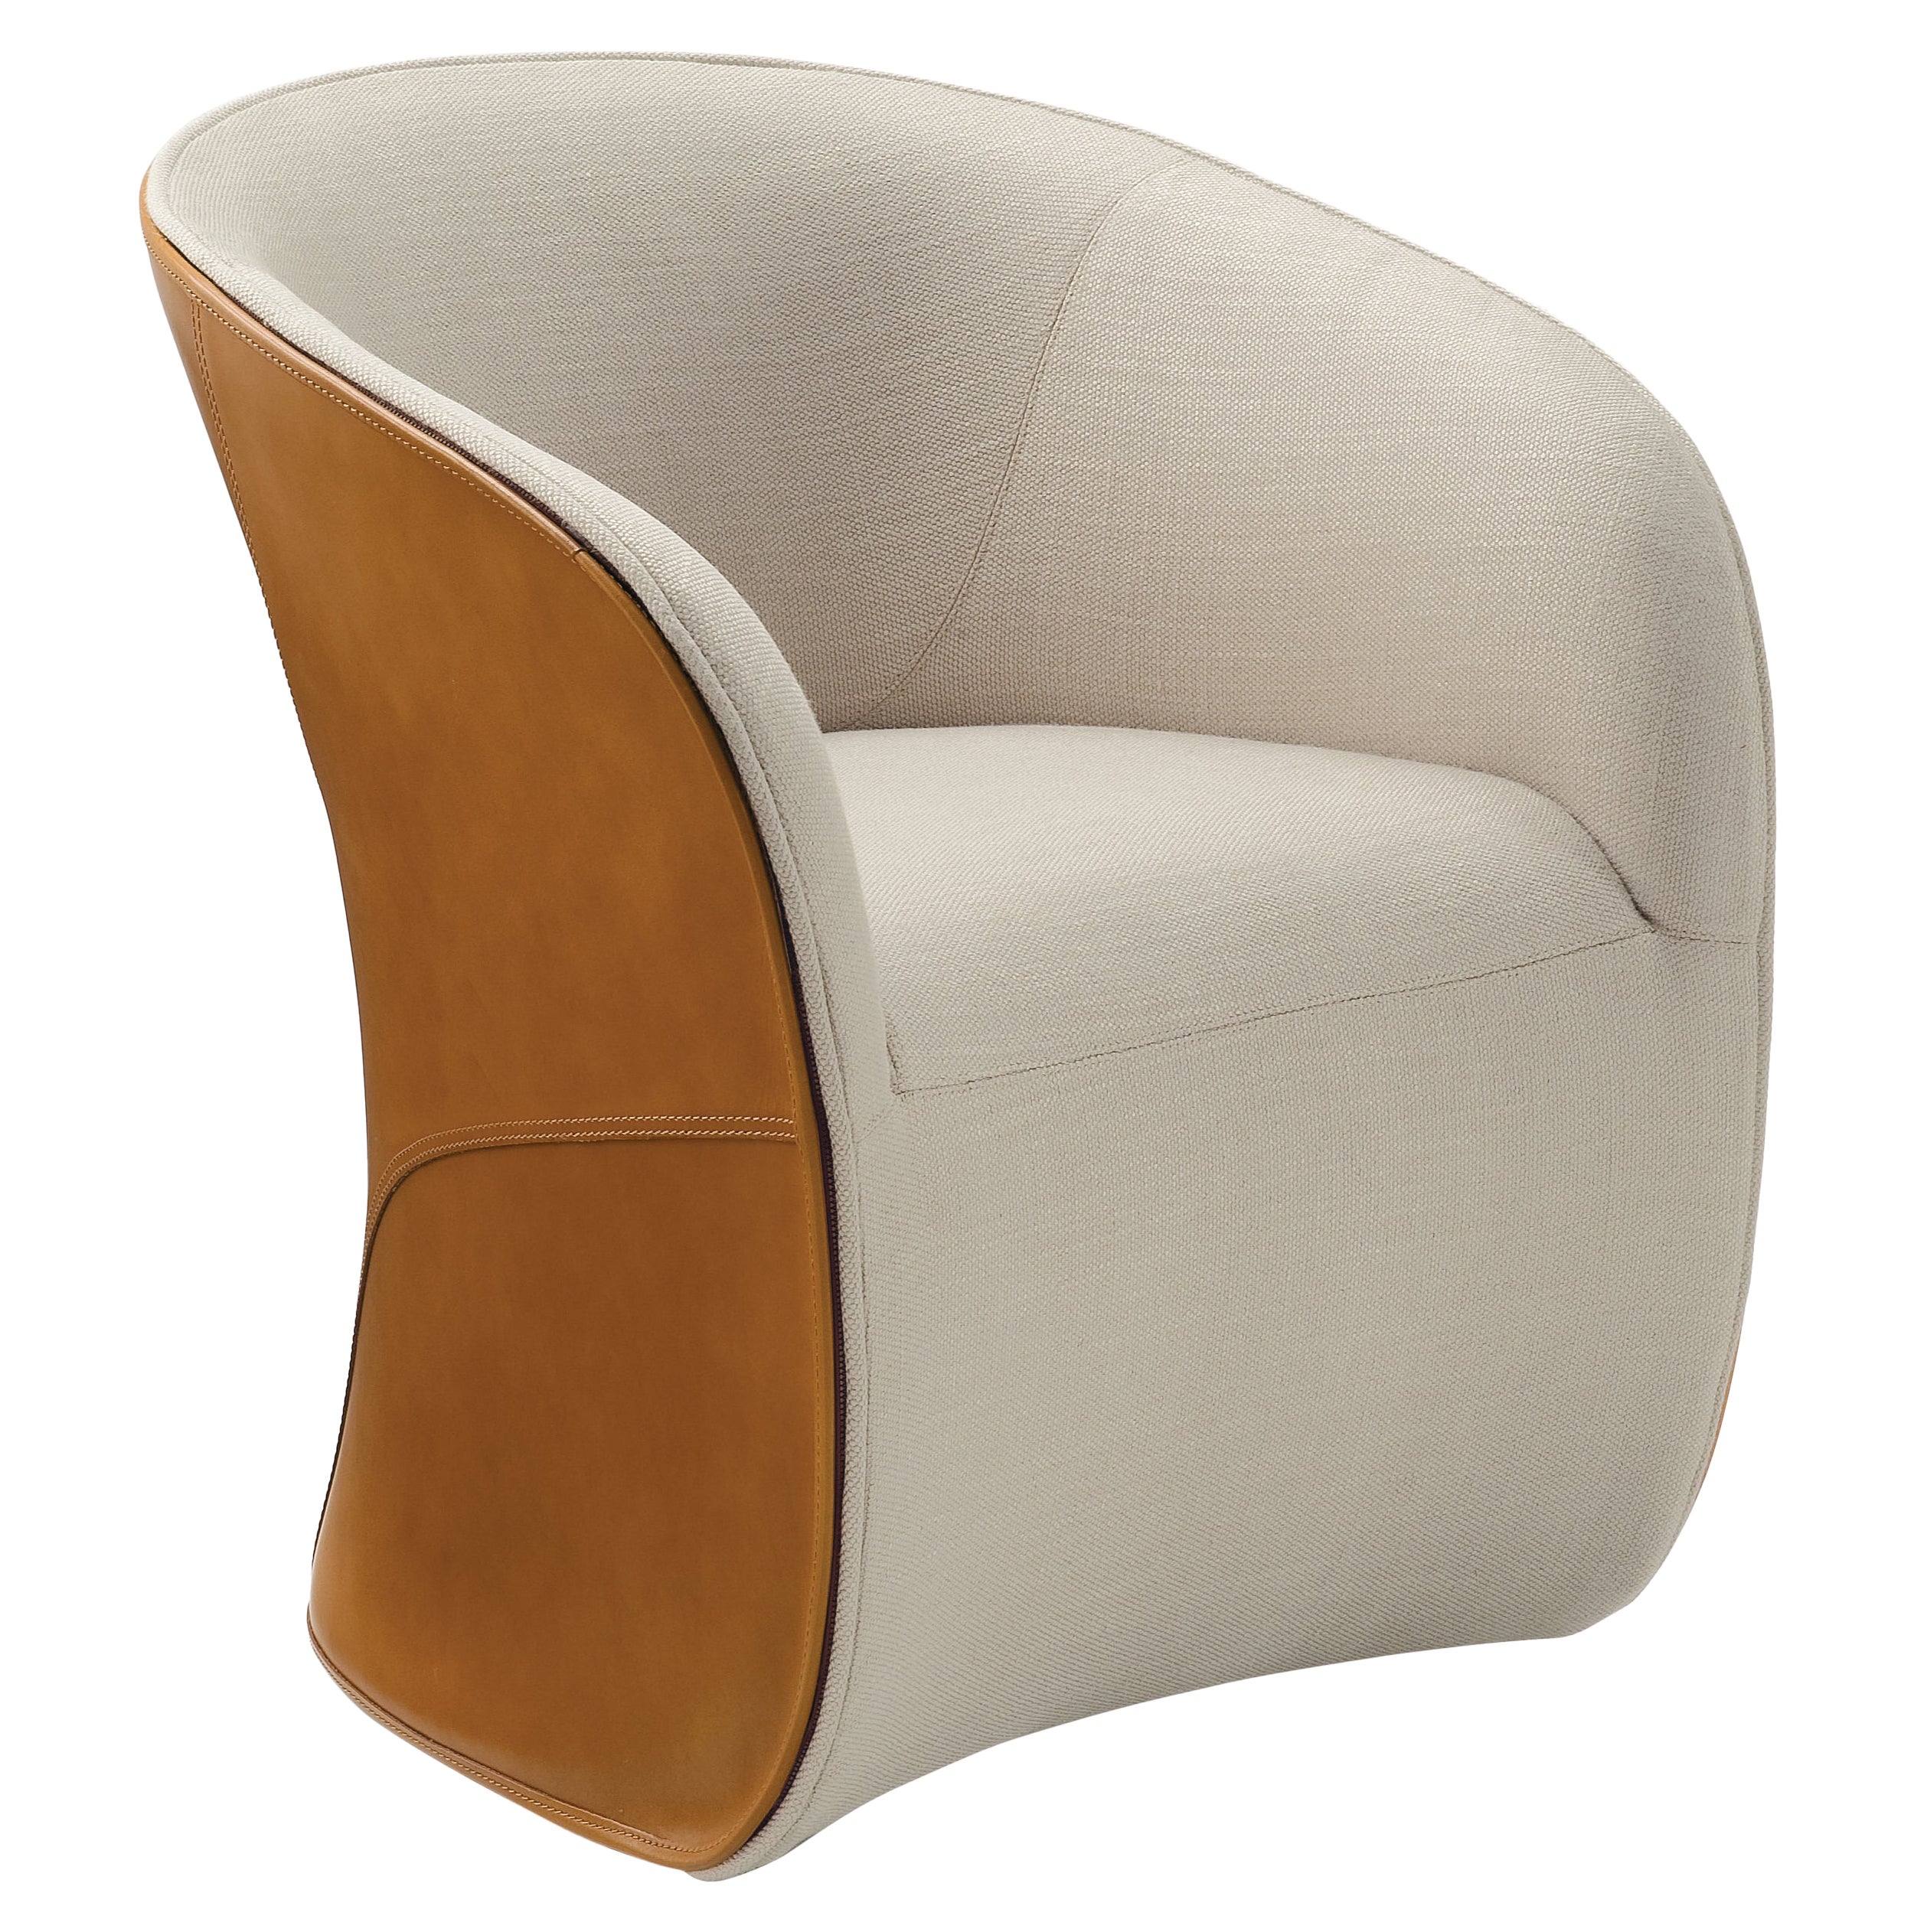 Zanotta Calla Armchair in Beige and Brown Upholstery with Steel Frame